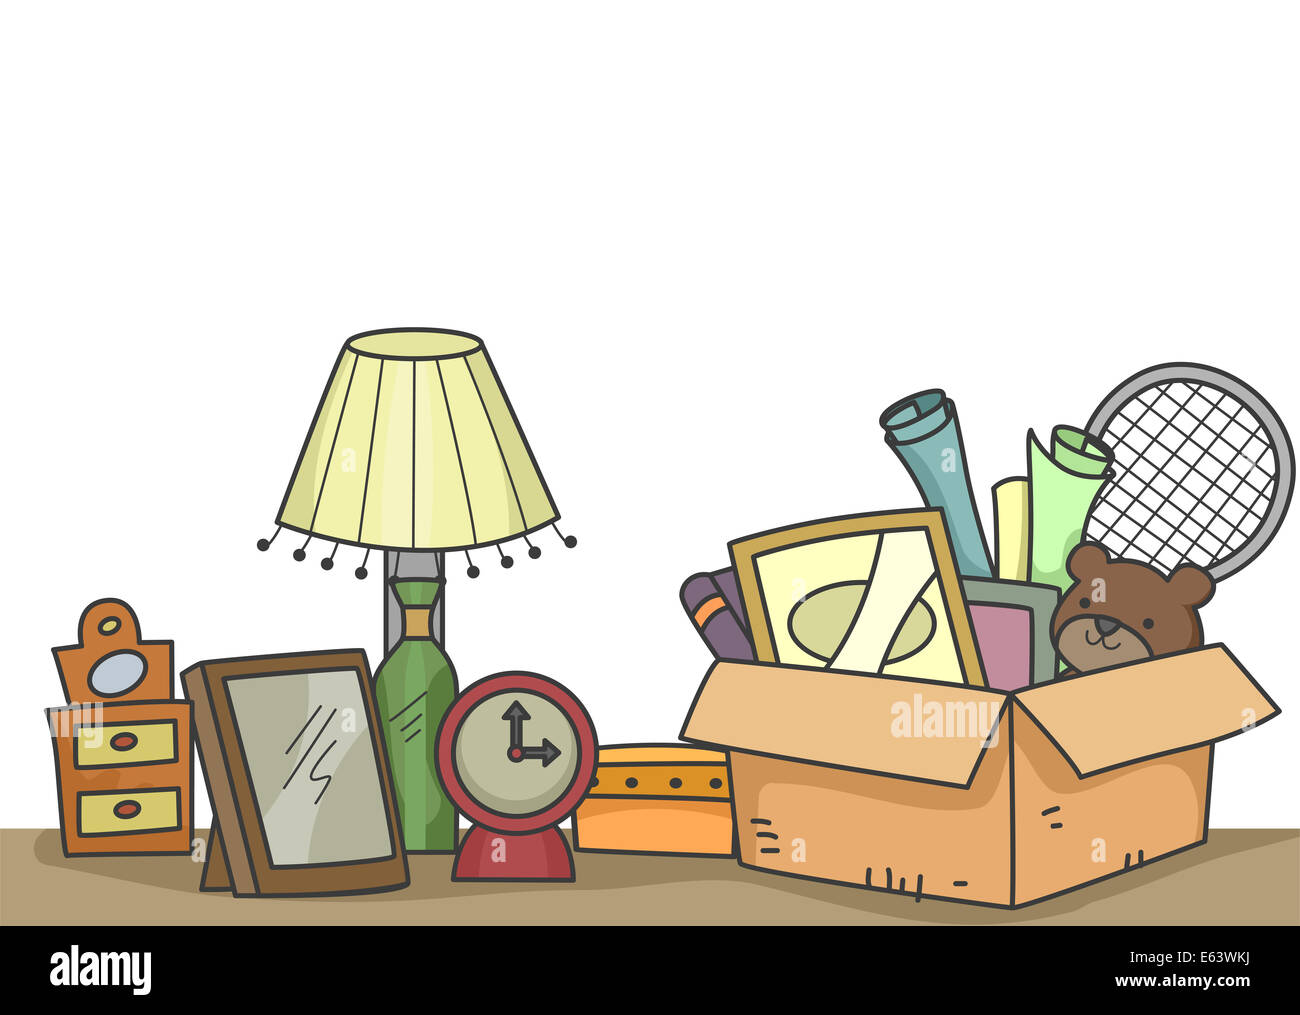 Illustration of Old Items That are About to be Donated Stock Photo